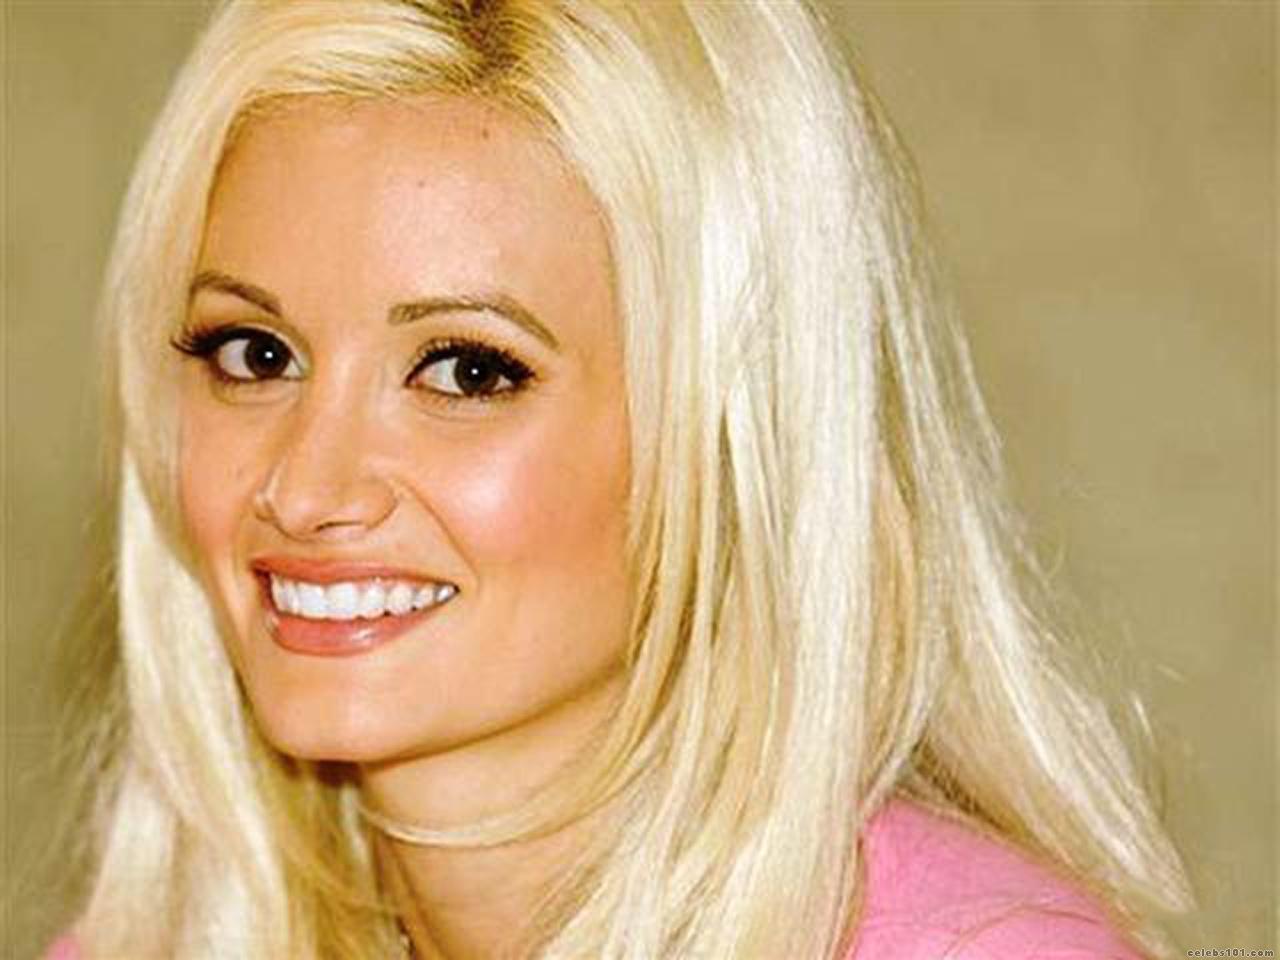 Holly Madison High quality wallpaper size 1280x960 of 1280x960